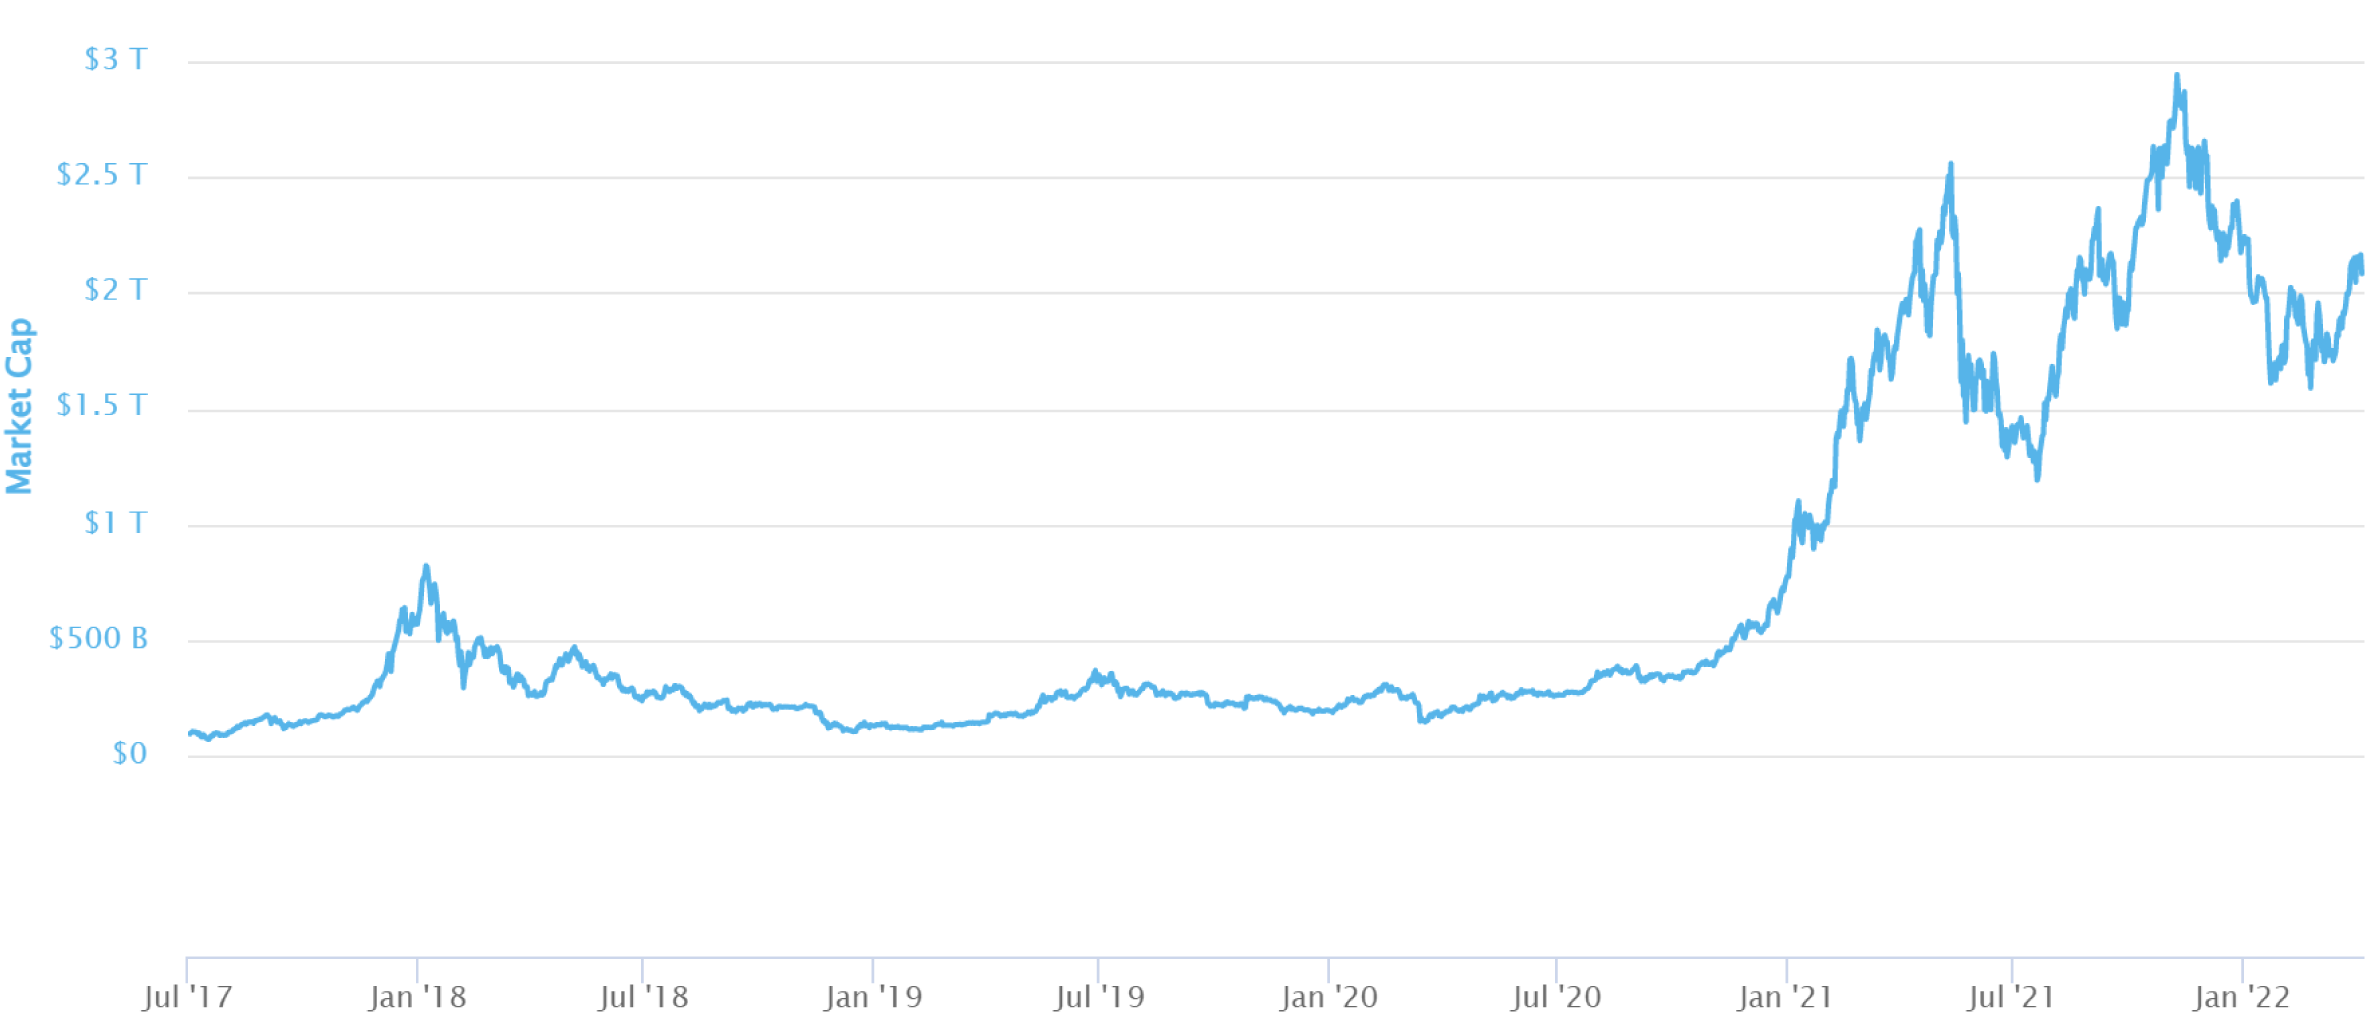 Cryptocurrency Market Cap Has Grown Quickly